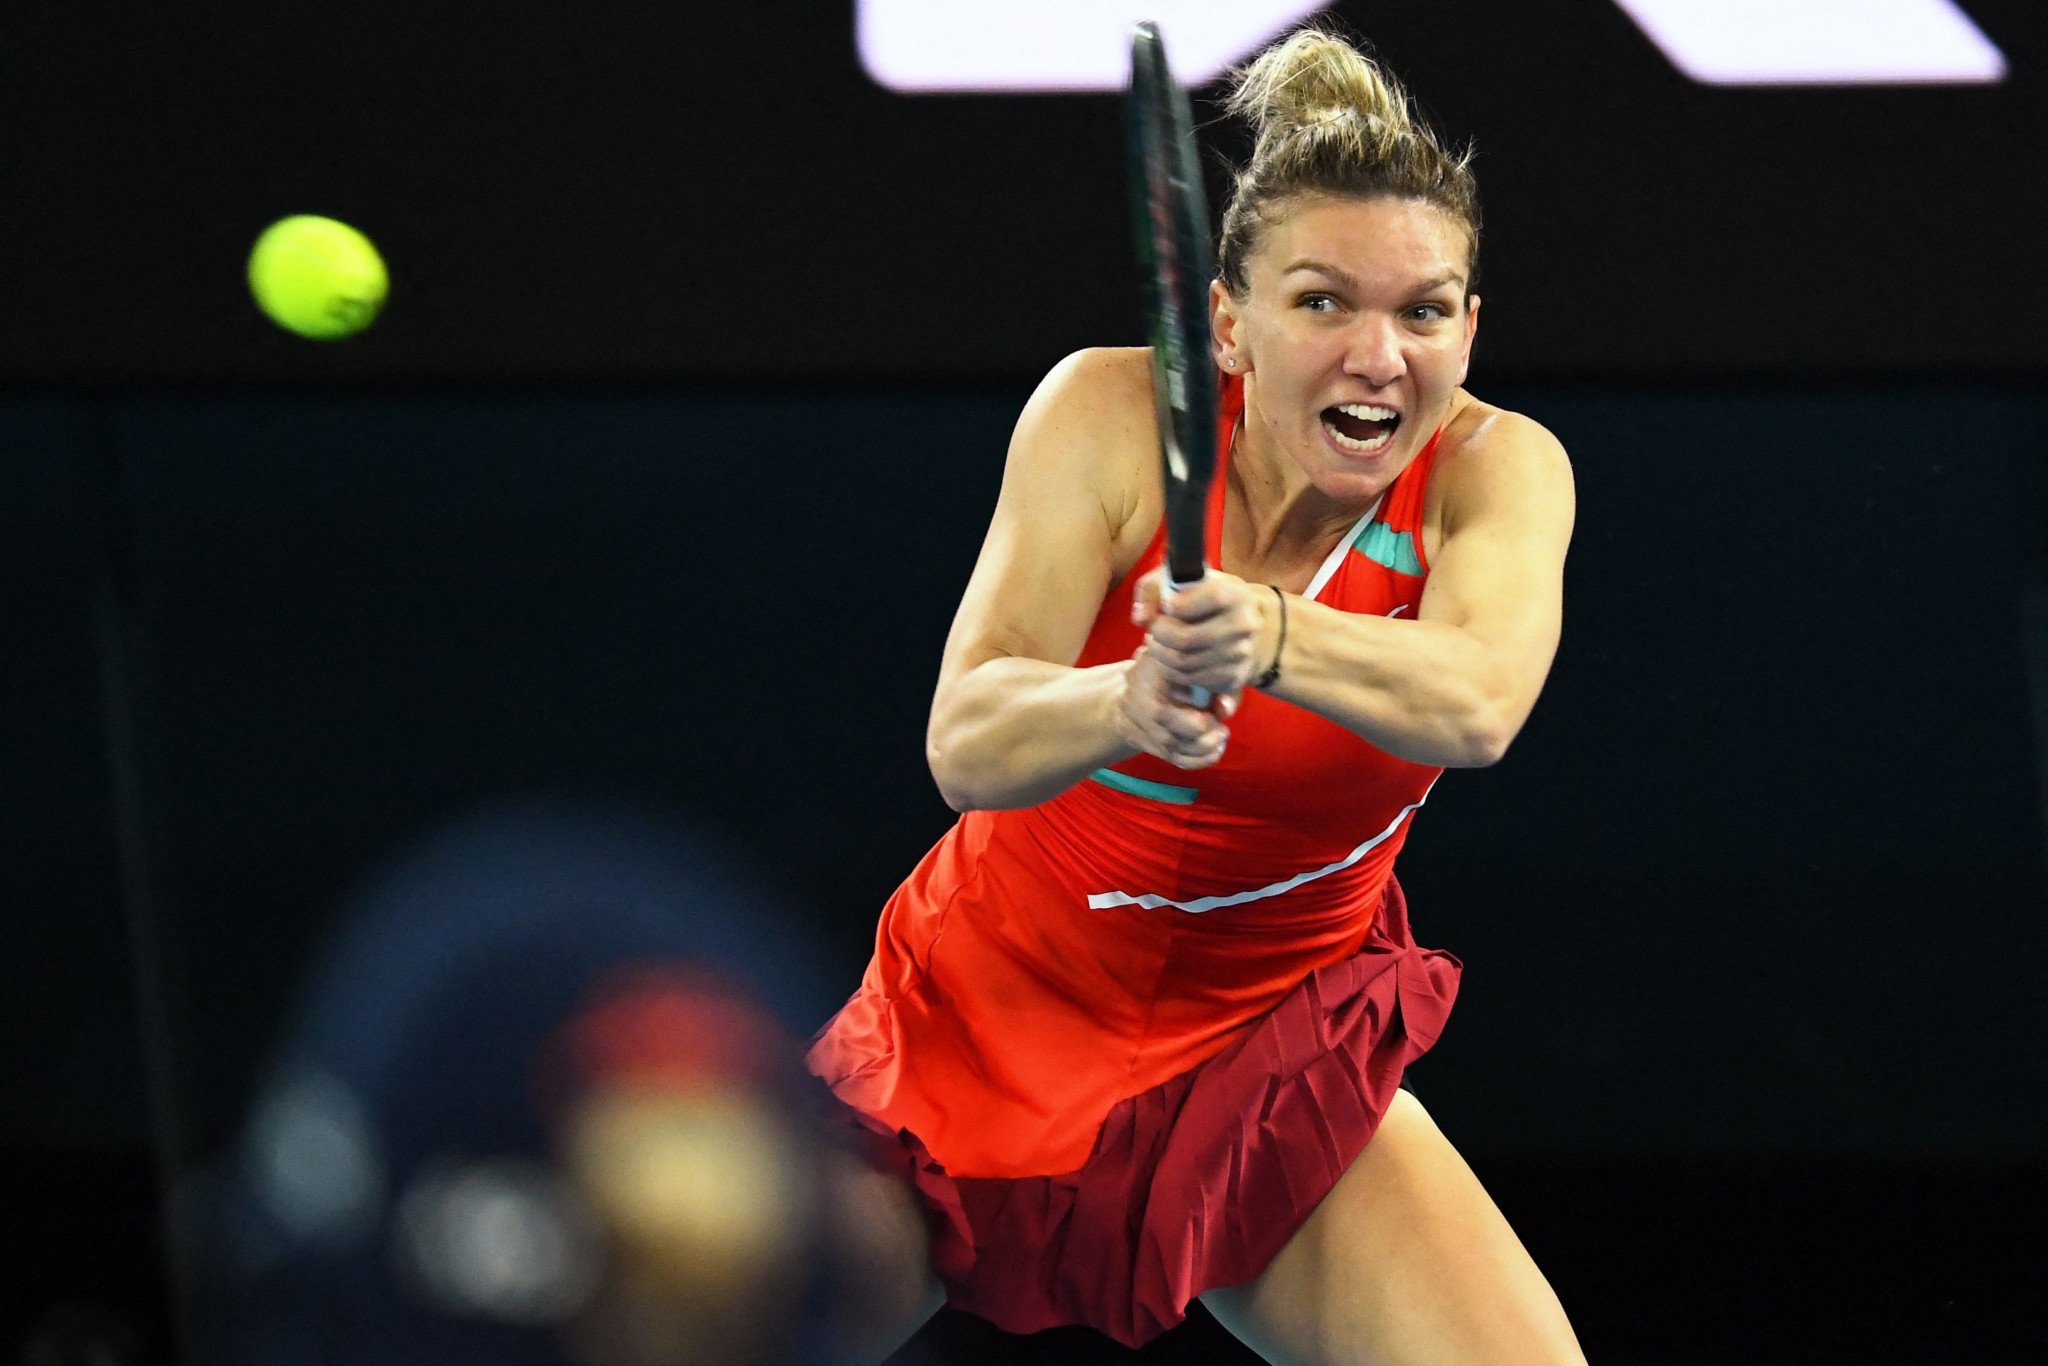 Romania's Simona Halep thumps a backhand on her way to an emphatic victory over Brazilian Beatriz Haddad Maia ©Getty Images